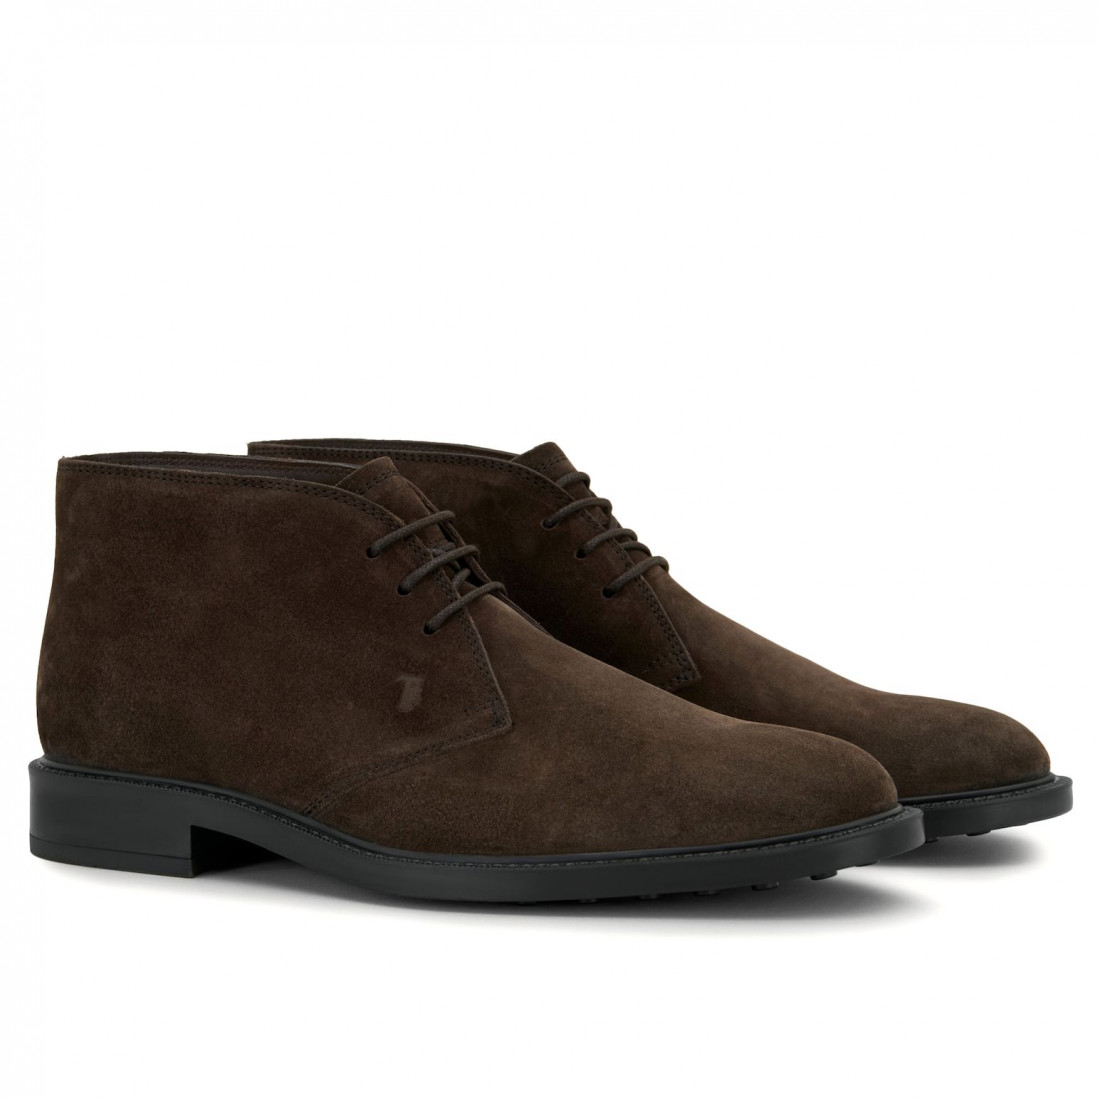 Short ankle boots Tod's in rich brown suede